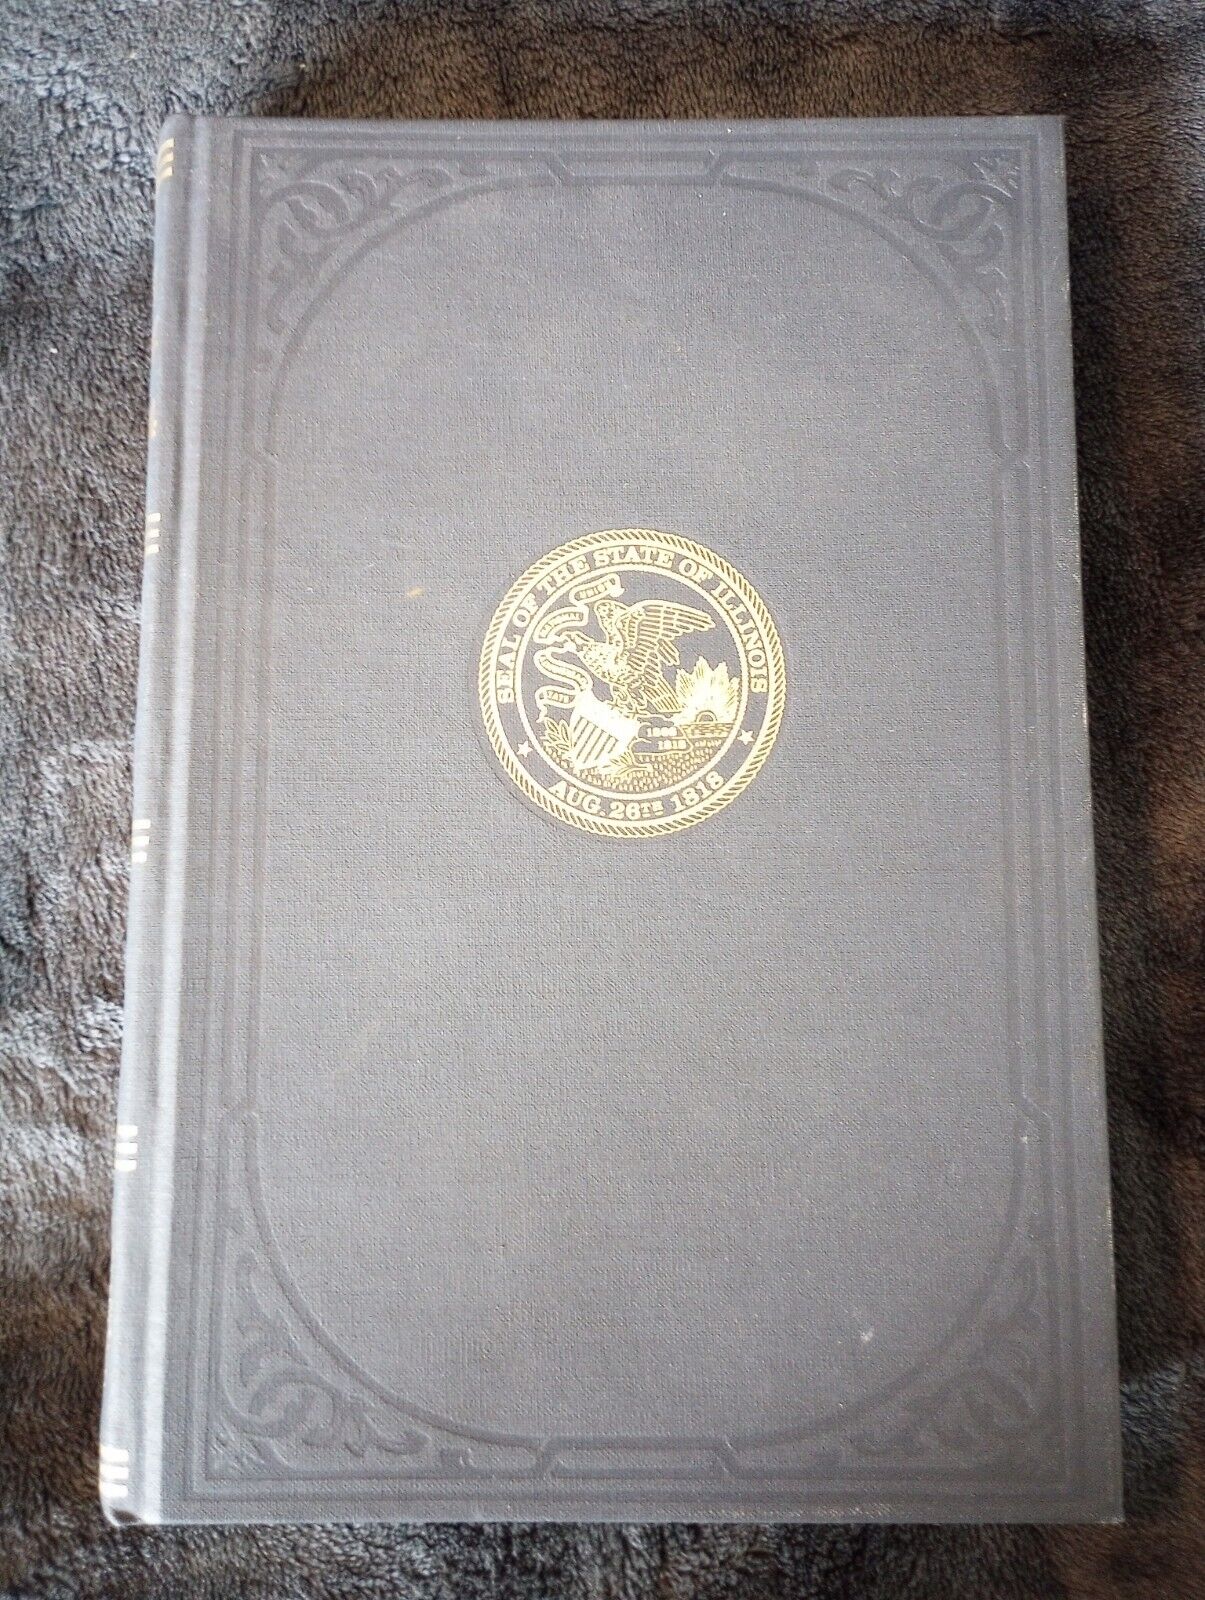 ILLINOIS BLUE BOOK 1993-1994 175th Anniversary Of The State of IL George H Ryan